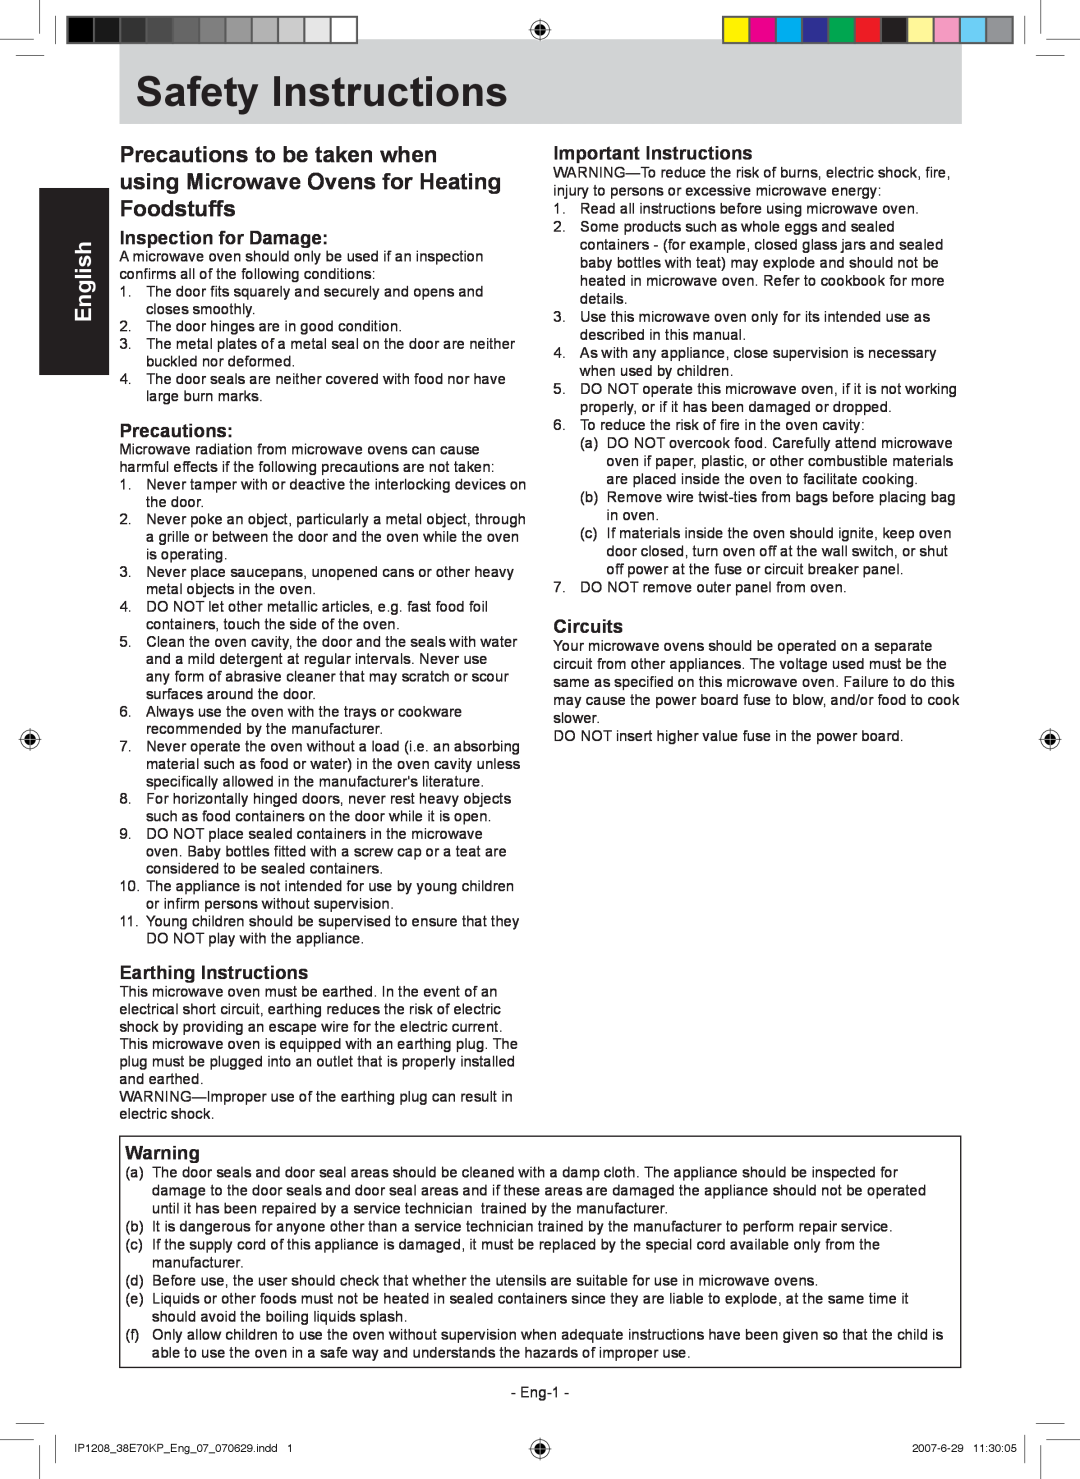 Panasonic NN-ST757W Safety Instructions, English, Inspection for Damage, Precautions, Important Instructions, Circuits 